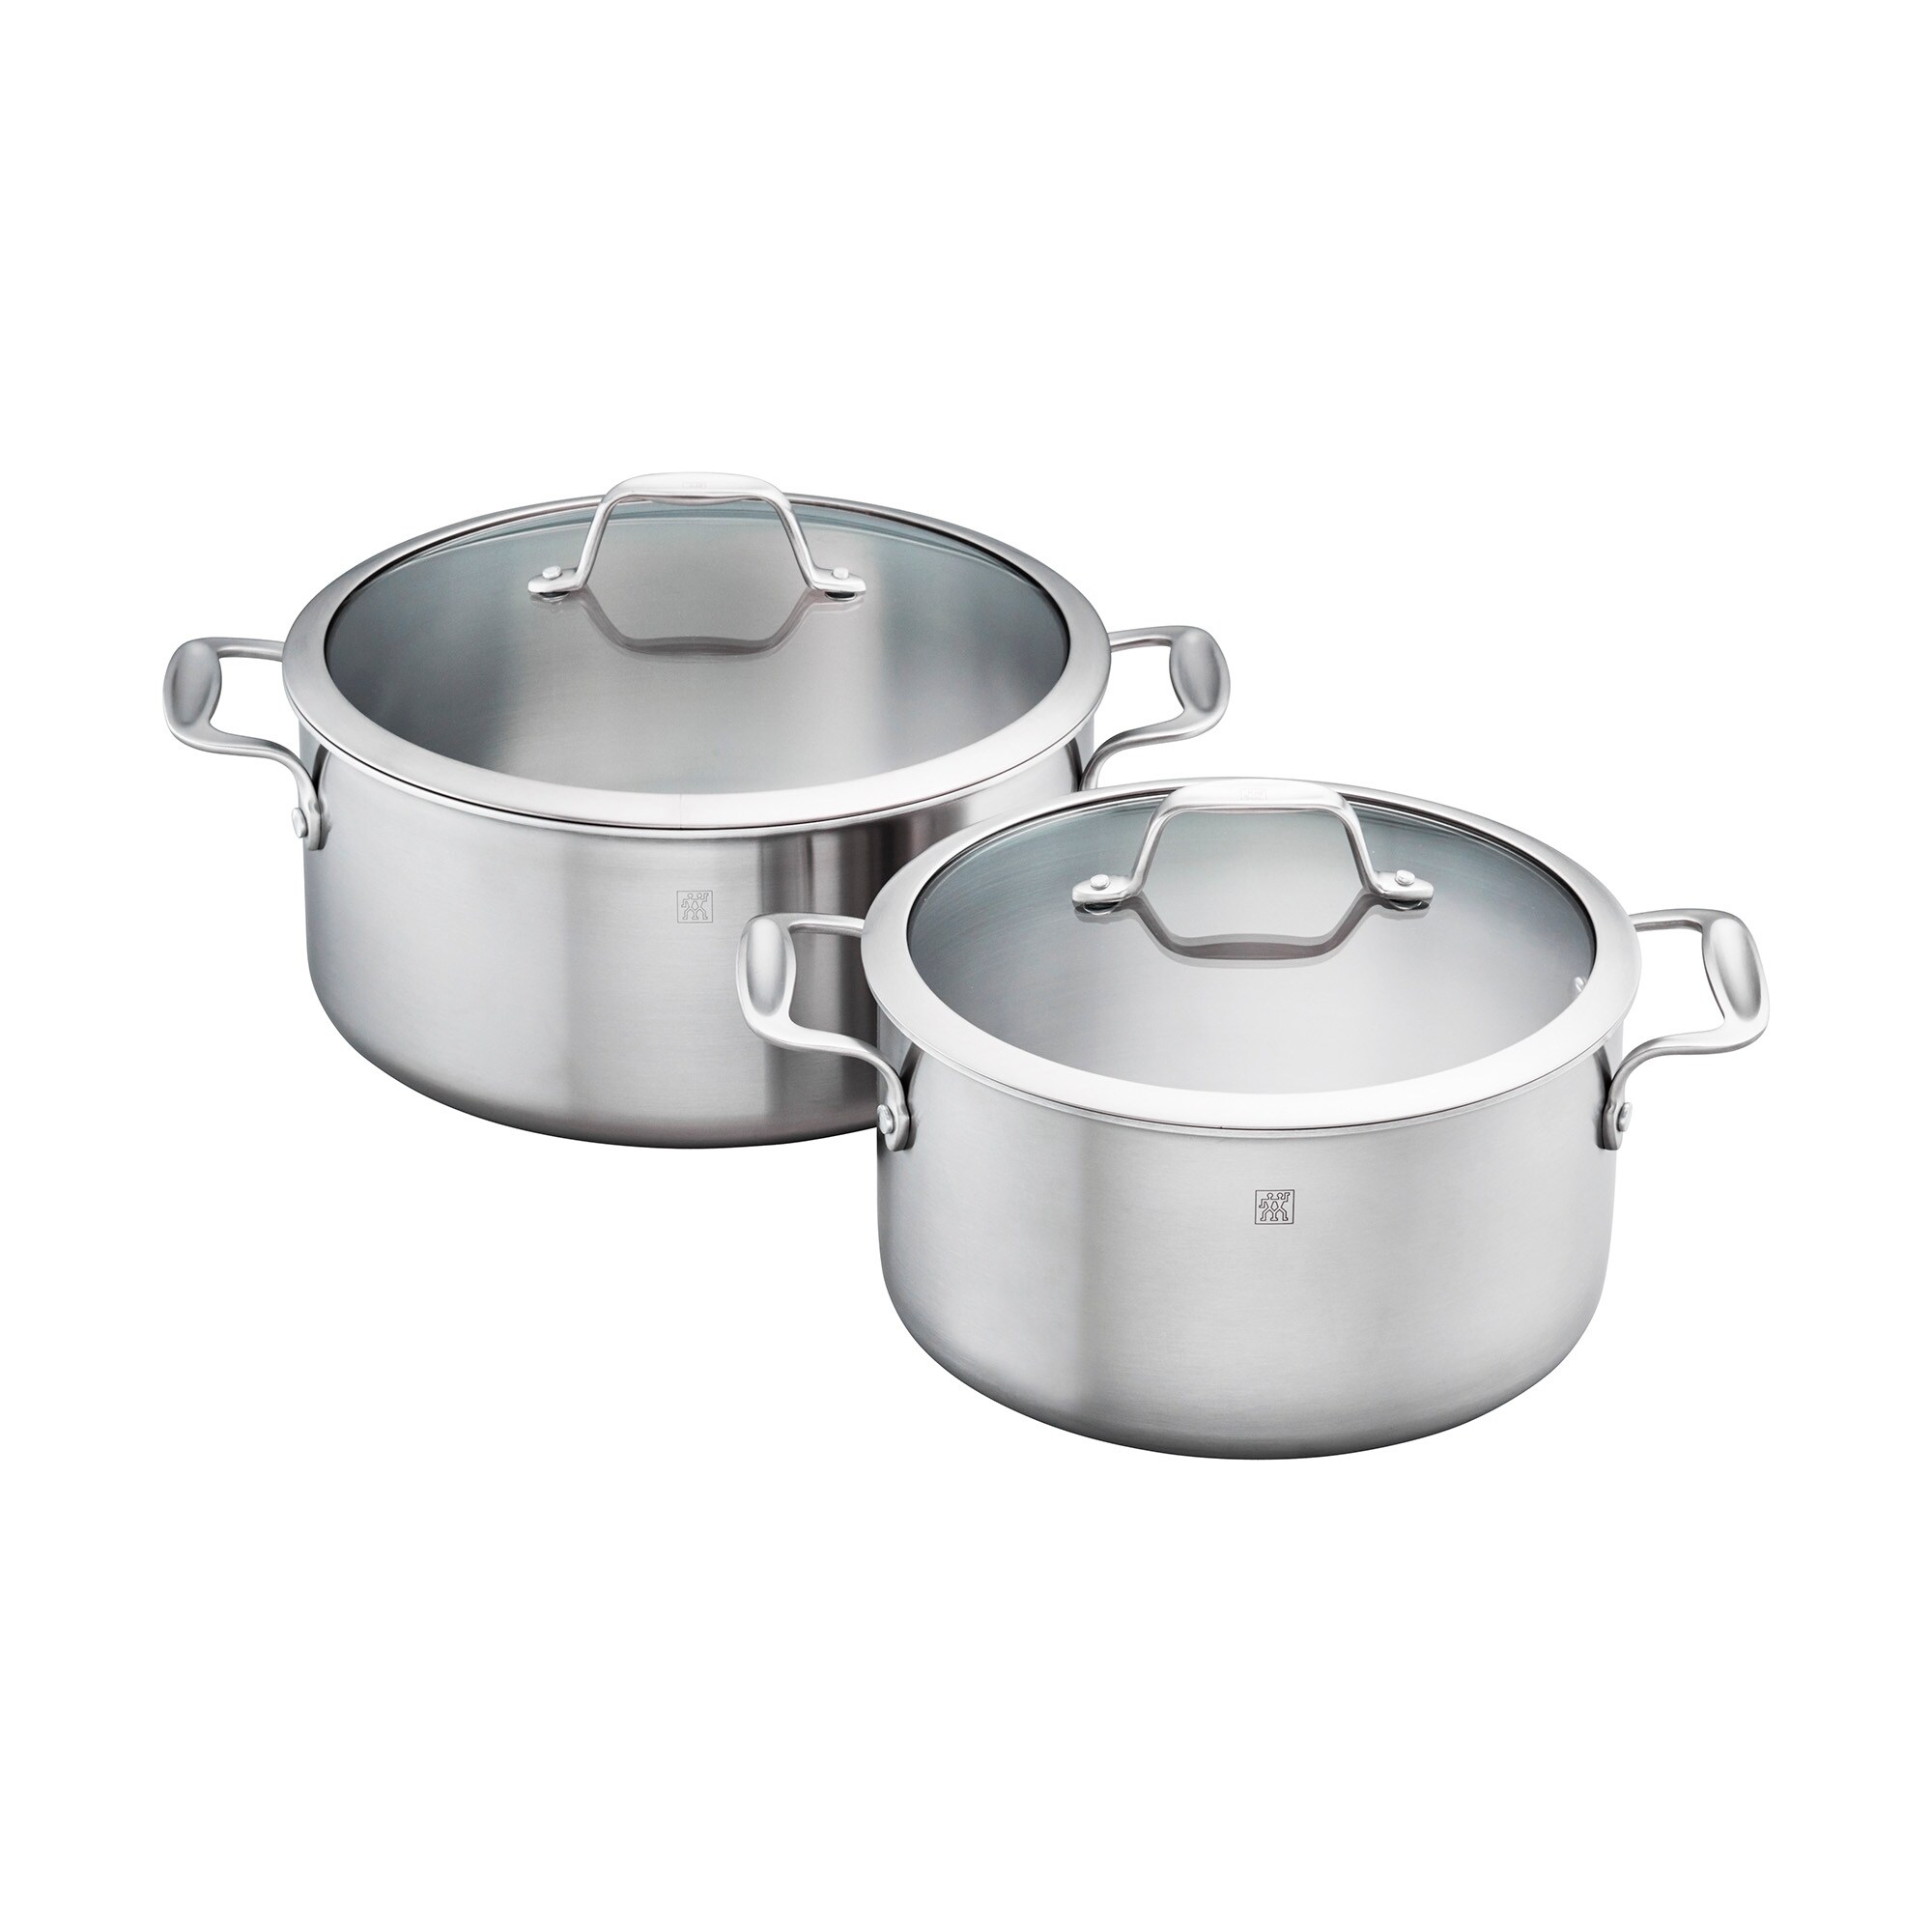 https://ak1.ostkcdn.com/images/products/is/images/direct/ff4c53c788d87dee8ddfe5b579f78b496e290cd7/ZWILLING-Spirit-3-ply-6-qt-Stainless-Steel-Dutch-Oven.jpg